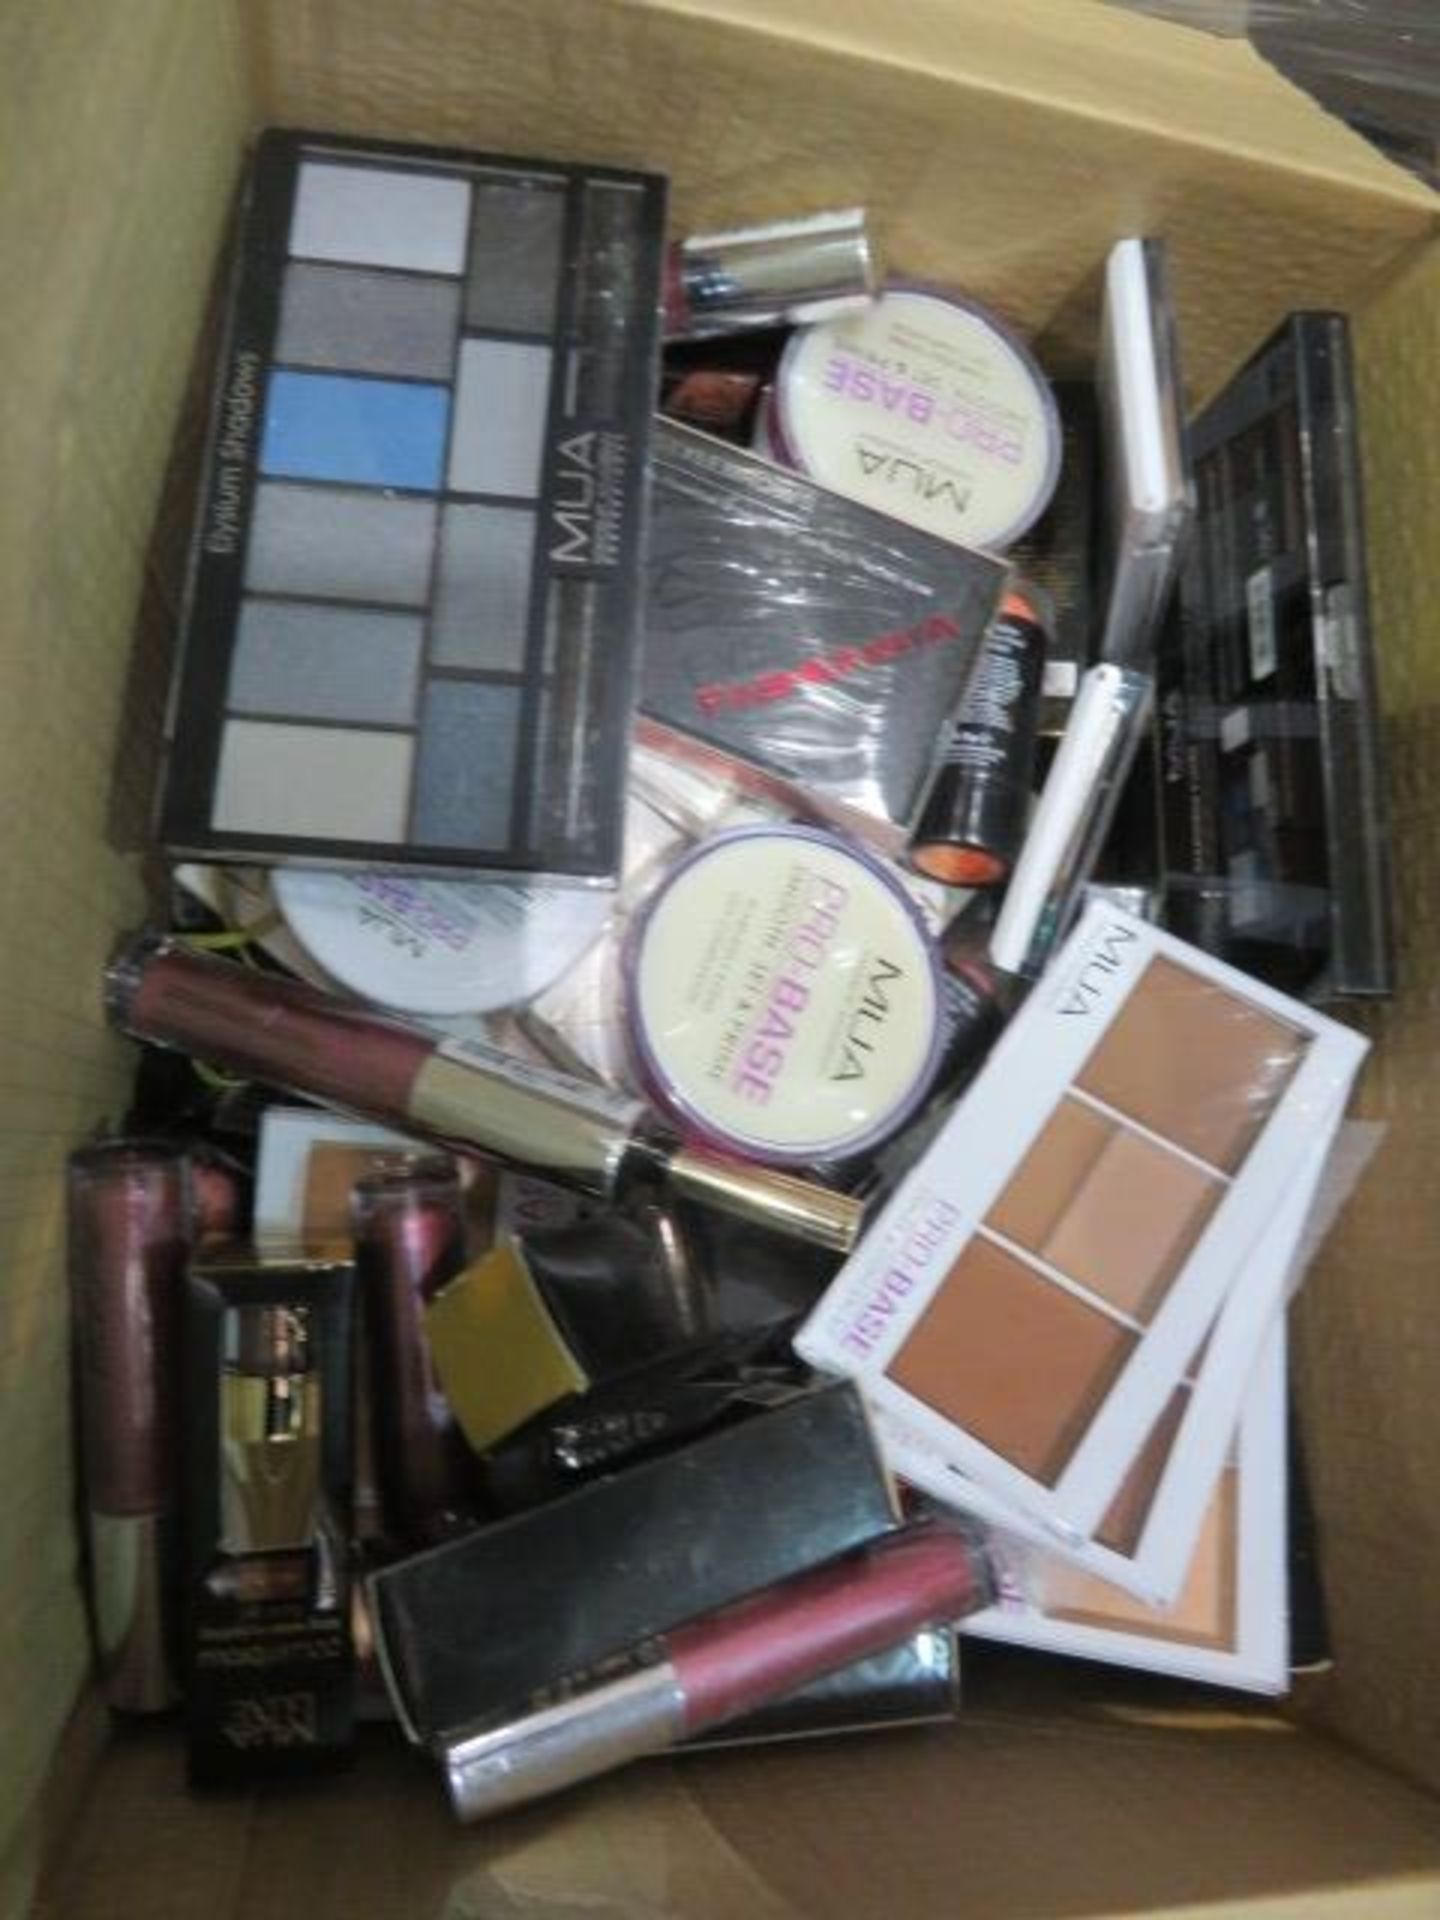 Circa. 200 items of various new make up acadamy make up to include: probase smooth, set & prime...